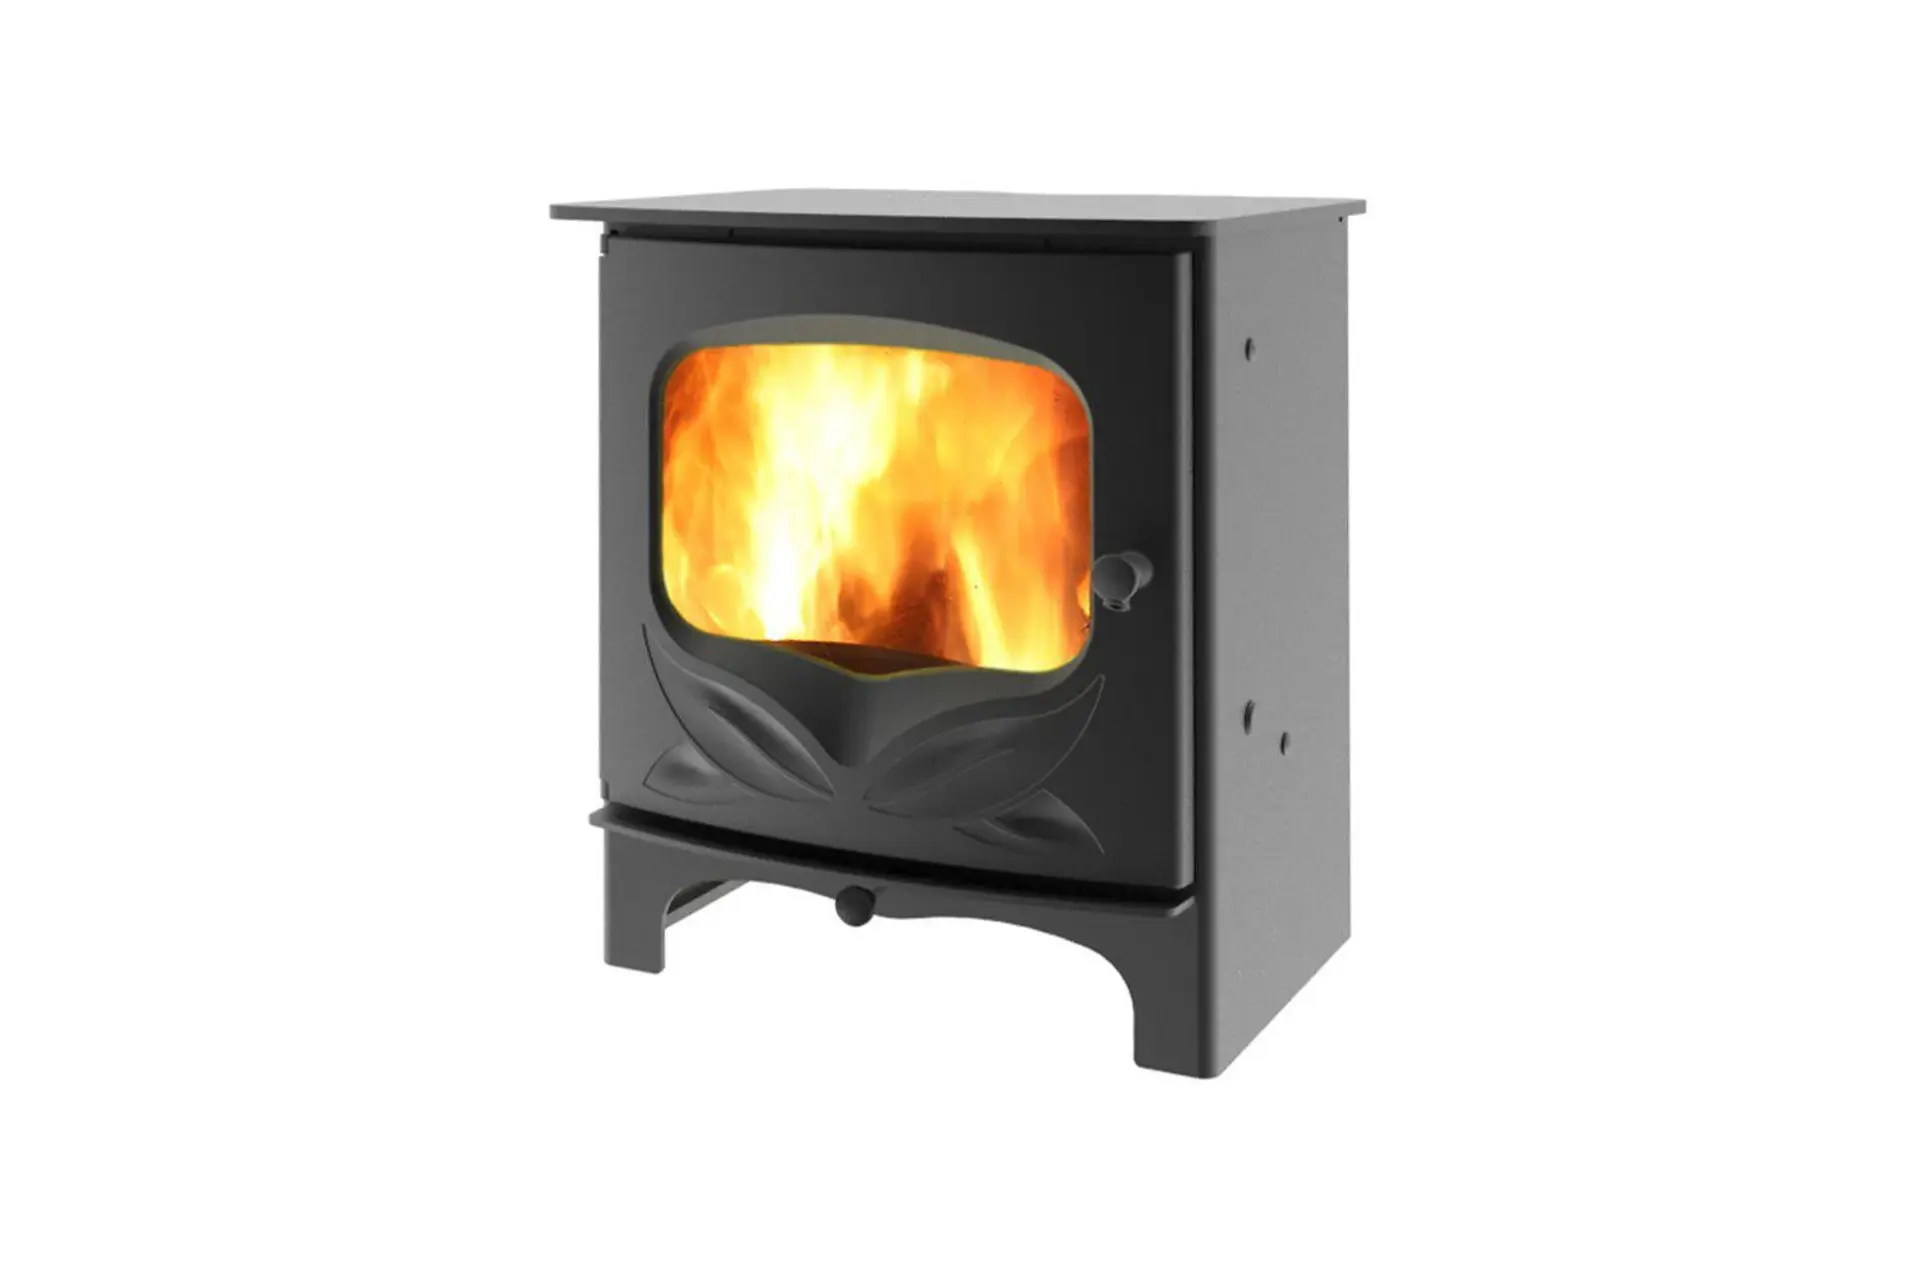 Charnwood-Bembridge-Country-Living-Wood-Burning-and-Multi-Fuel-Stove-Charnwood-Stoves-5_bdcde1af-1483-488c-a29c-5c96399cf620_5000x.png